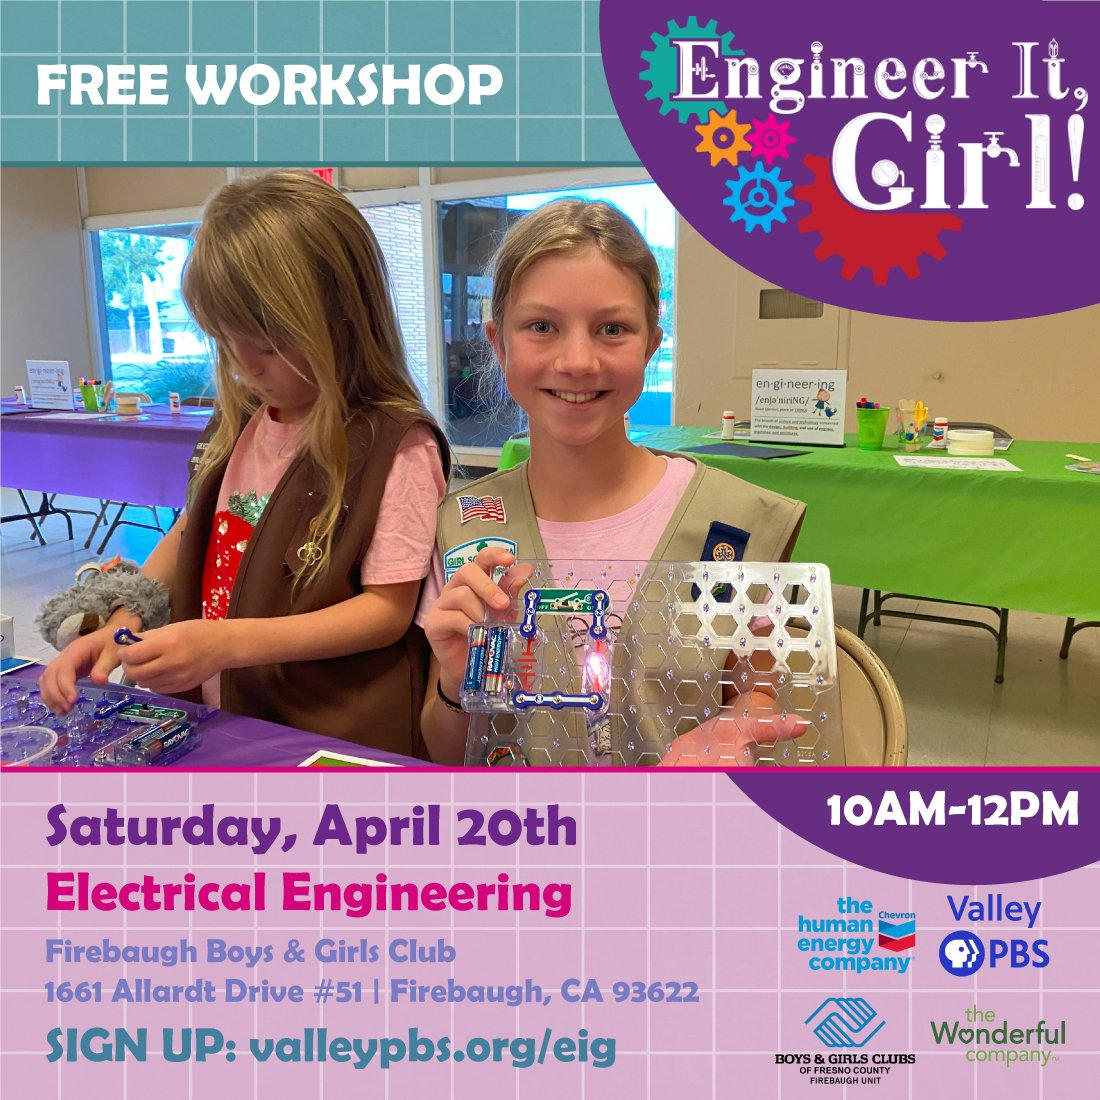 It's not too late to join Valley PBS and Chevron as we'll be traveling to Firebaugh for Electrical Engineering on Saturday, April 20th. Sign up now and let’s Engineer It, Girl! Sign up: valleypbs.org/eig